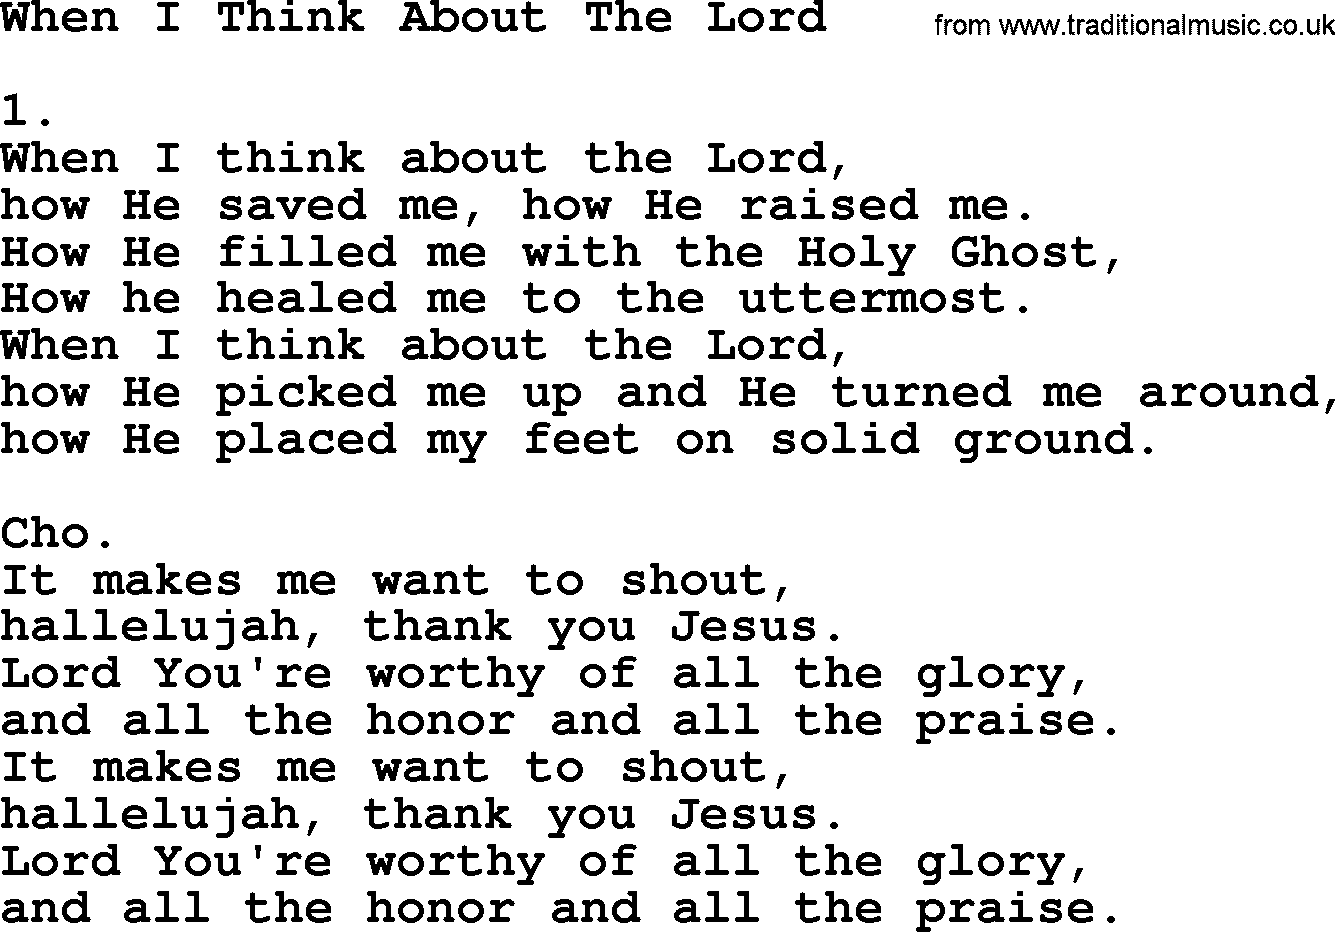 Apostolic & Pentecostal Hymns and Songs, Hymn: When I Think About The Lord lyrics and PDF